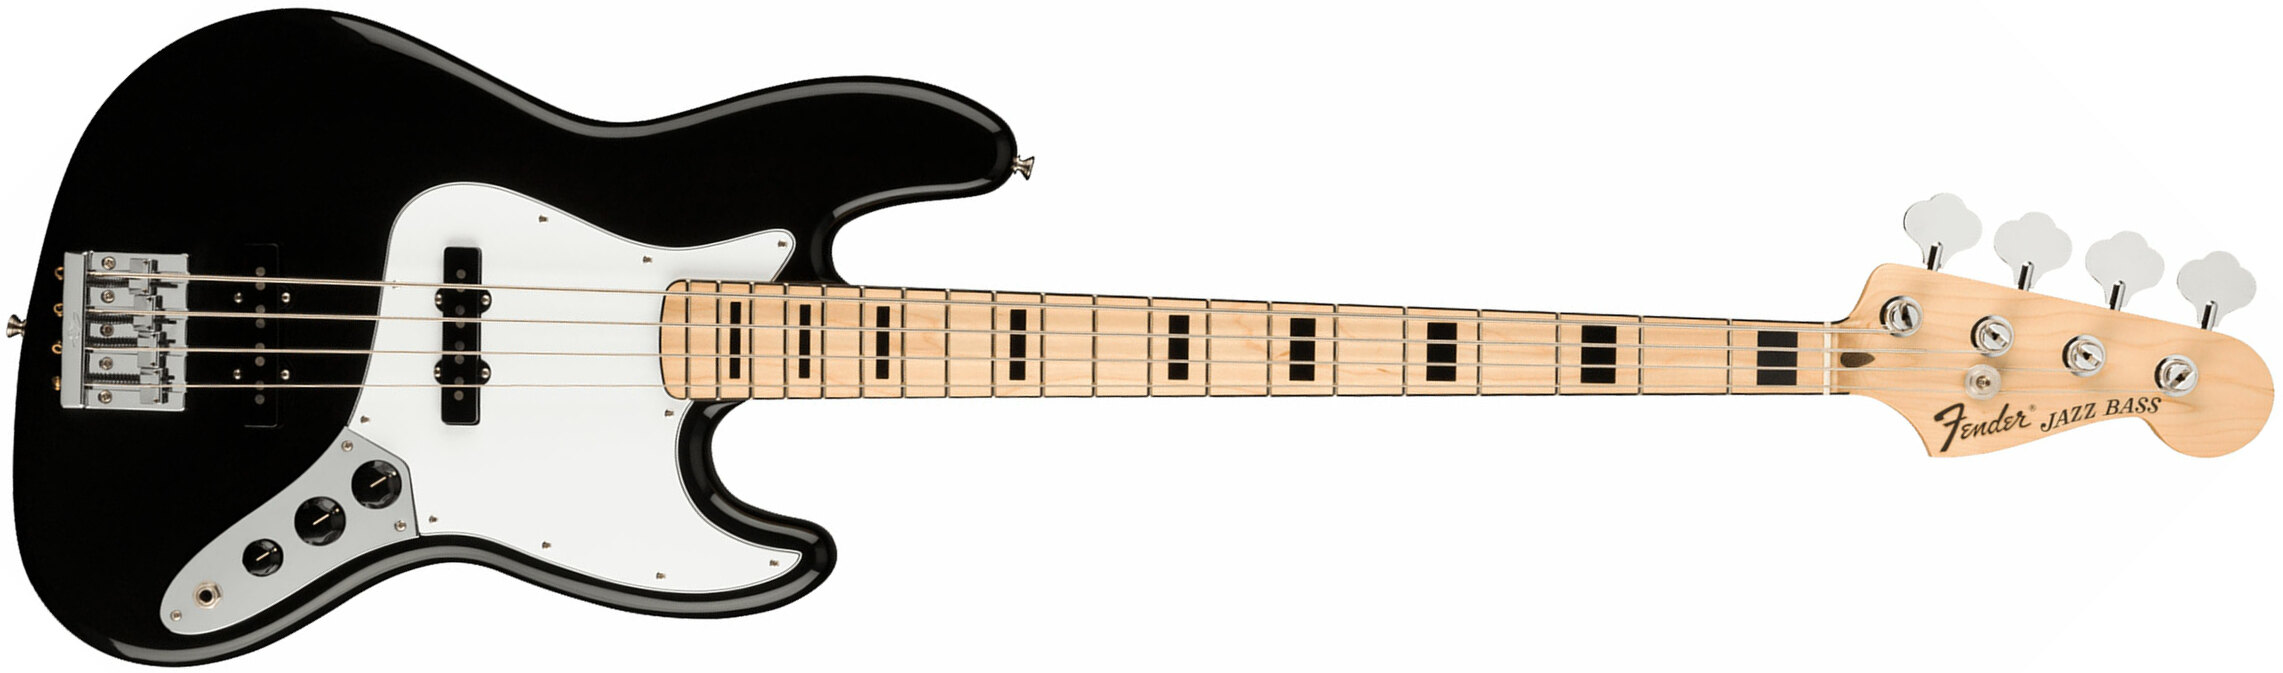 Fender Geddy Lee Jazz Bass Signature Mex Mn - Black - Basse Électrique Solid Body - Main picture